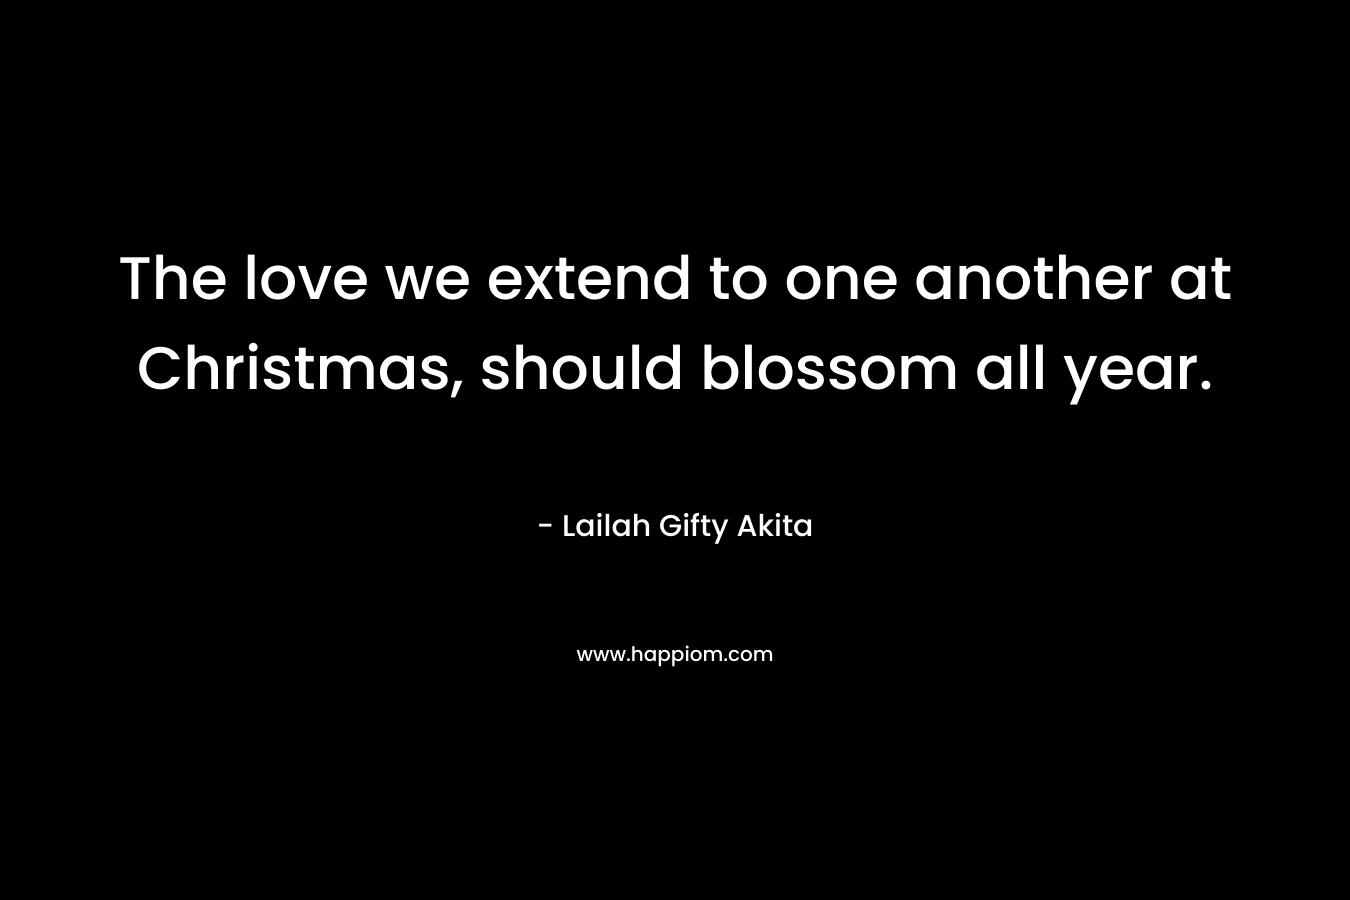 The love we extend to one another at Christmas, should blossom all year. – Lailah Gifty Akita